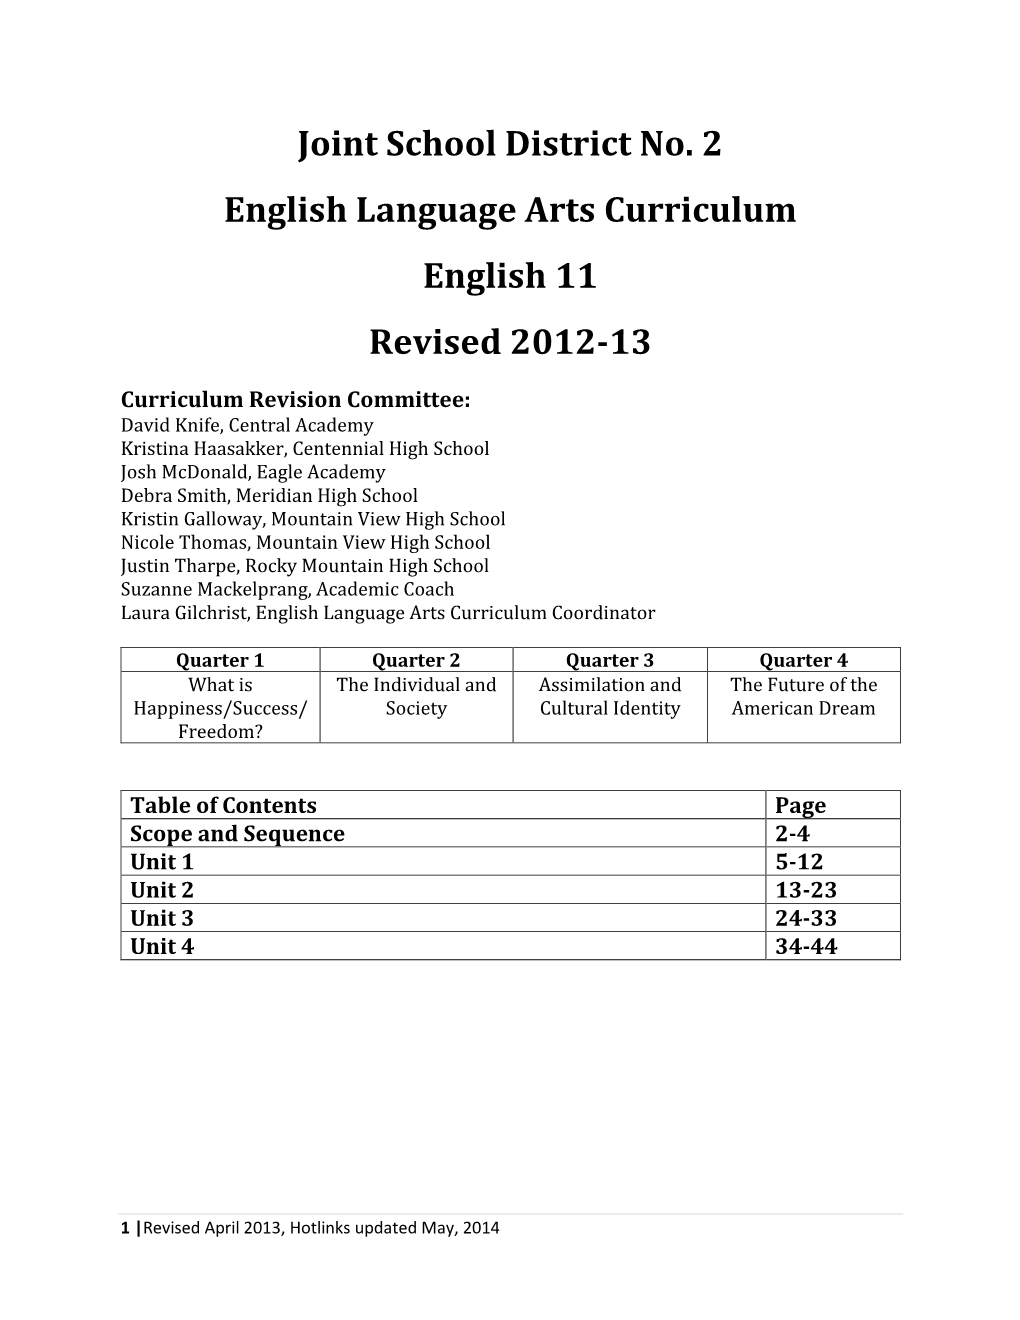 Joint School District No. 2 English Language Arts Curriculum English 11 Revised 2012-13